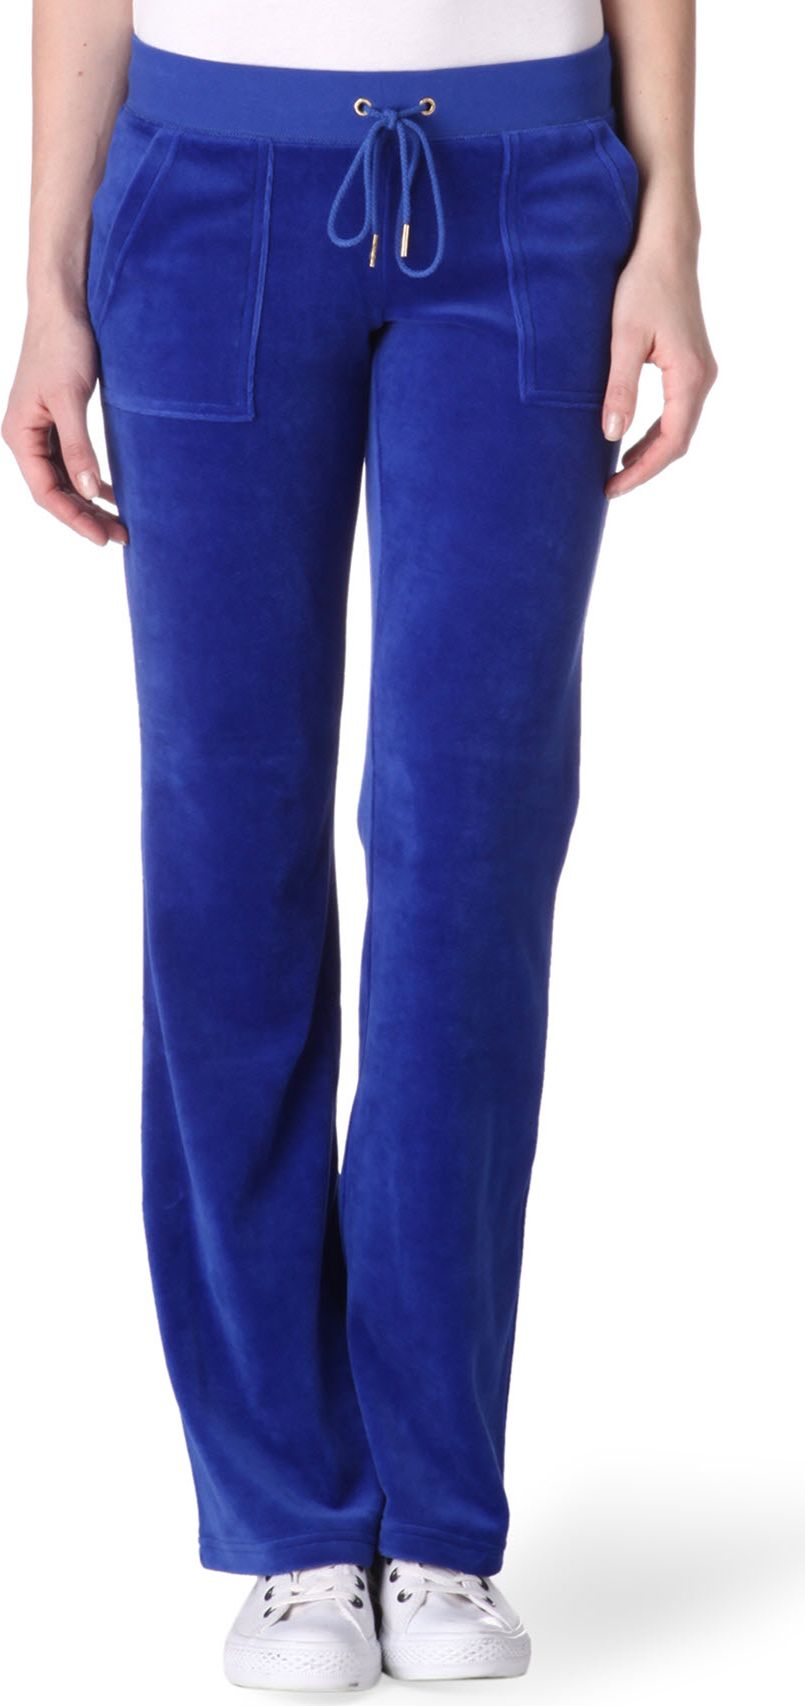 Juicy Couture Velour Jogging Bottoms in Blue - Lyst